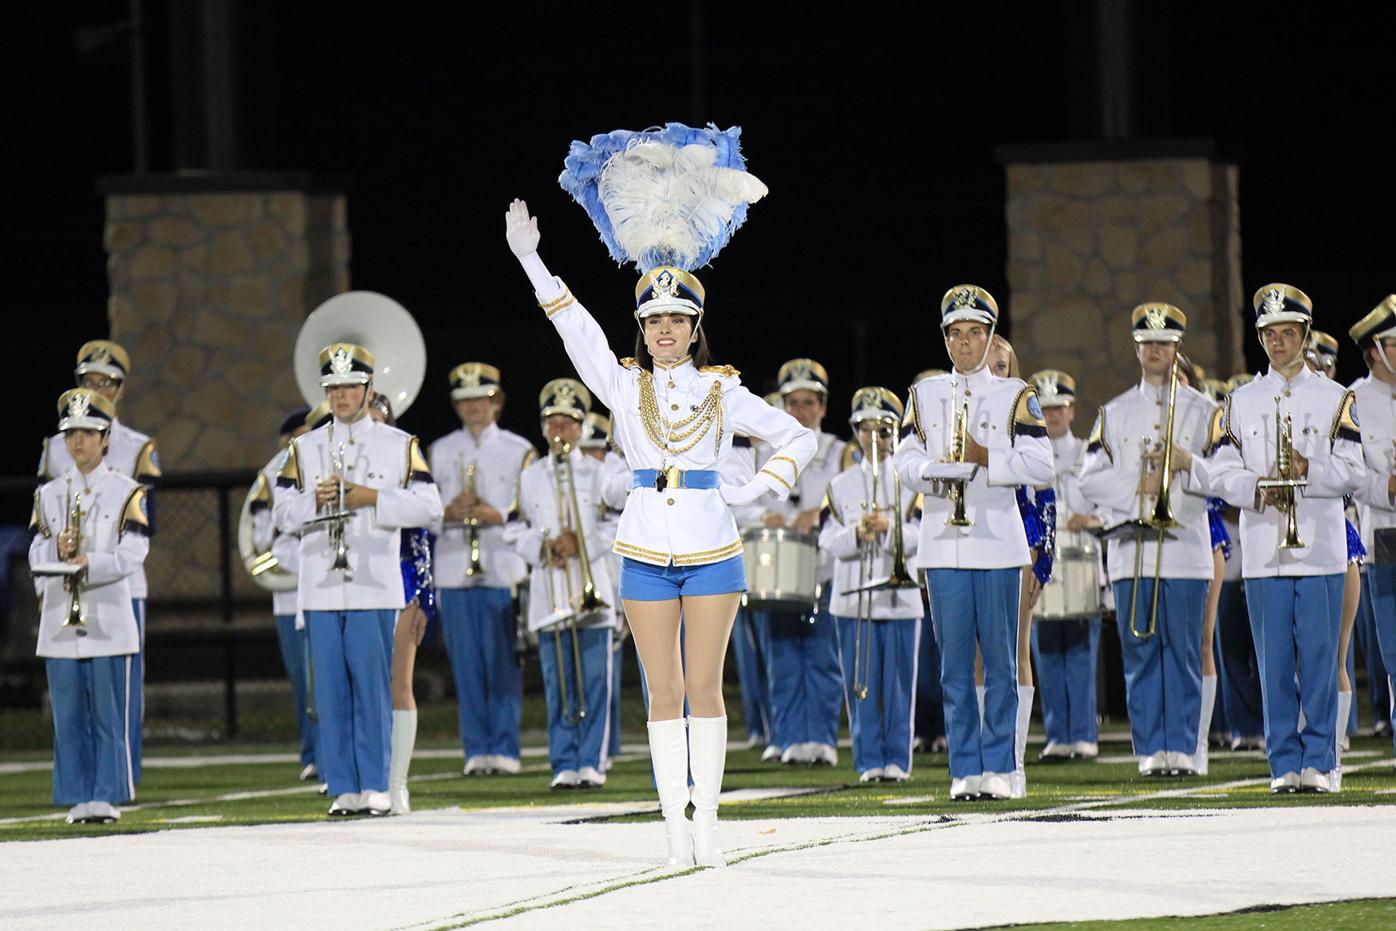 marching band dressed in white and blue uniforms led by the drum major